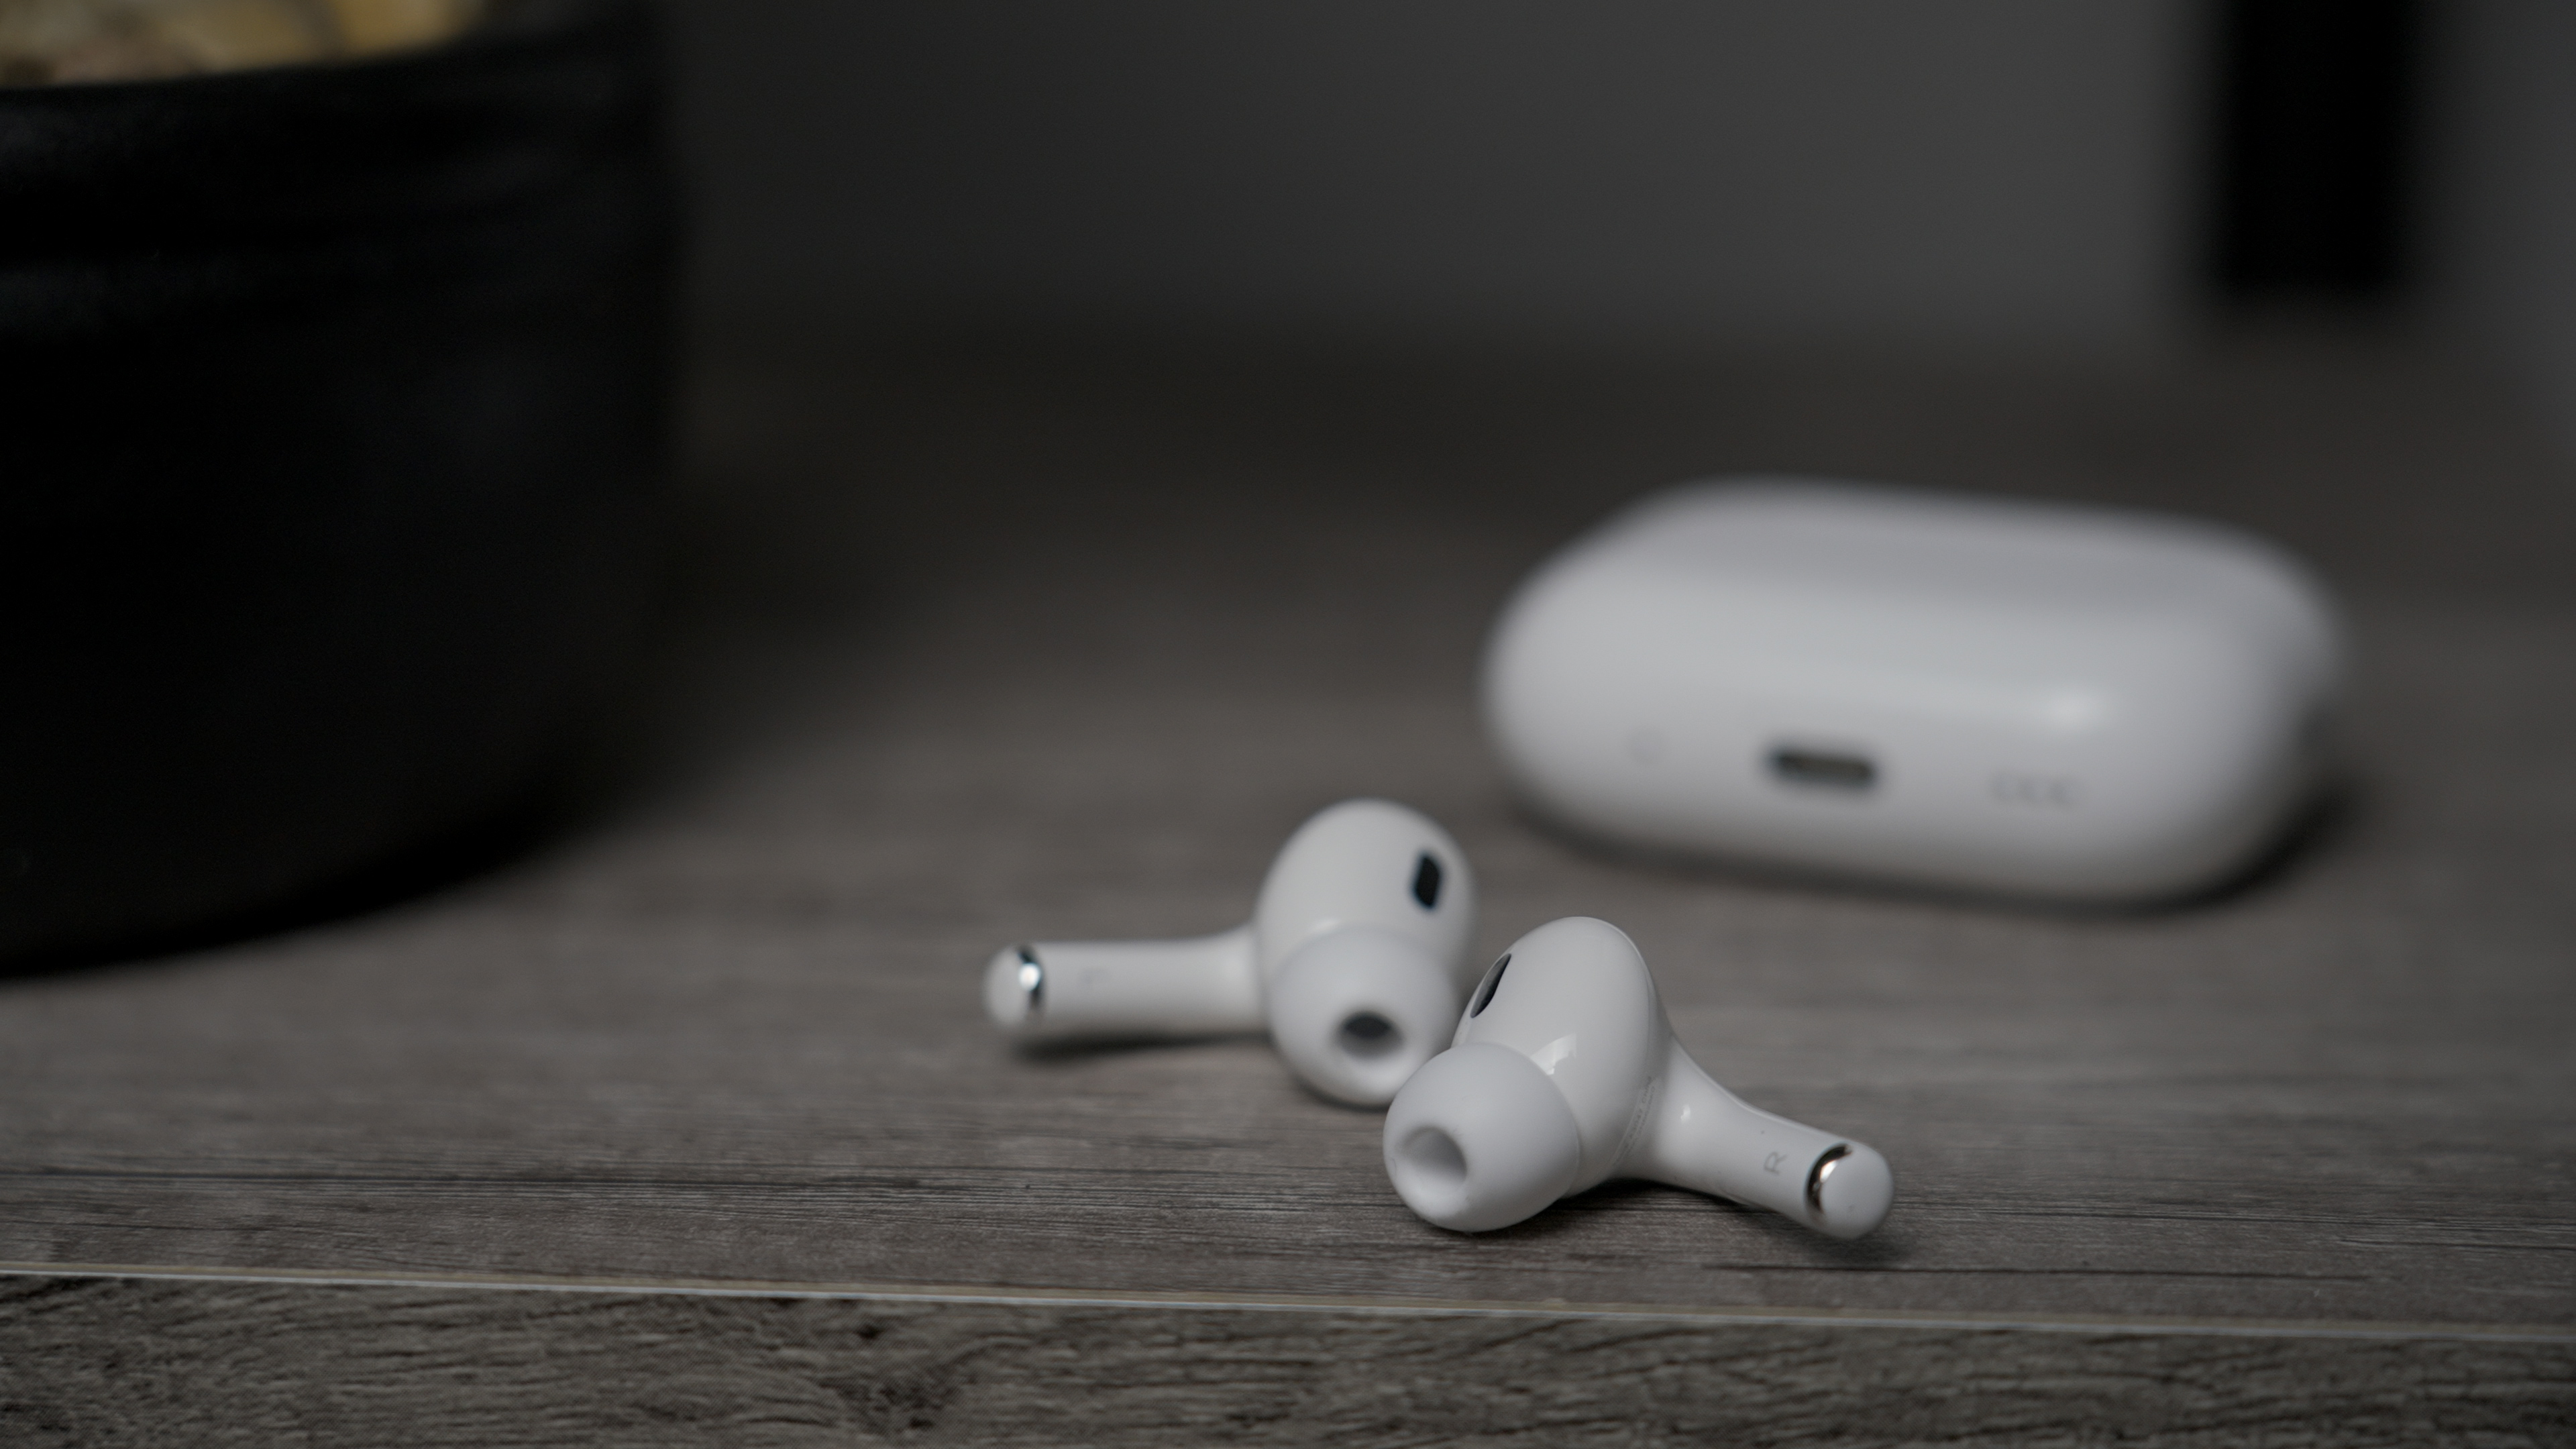 New AirPods 2024 release date: AirPods 4, AirPods Pro 3, Lite & Max rumors